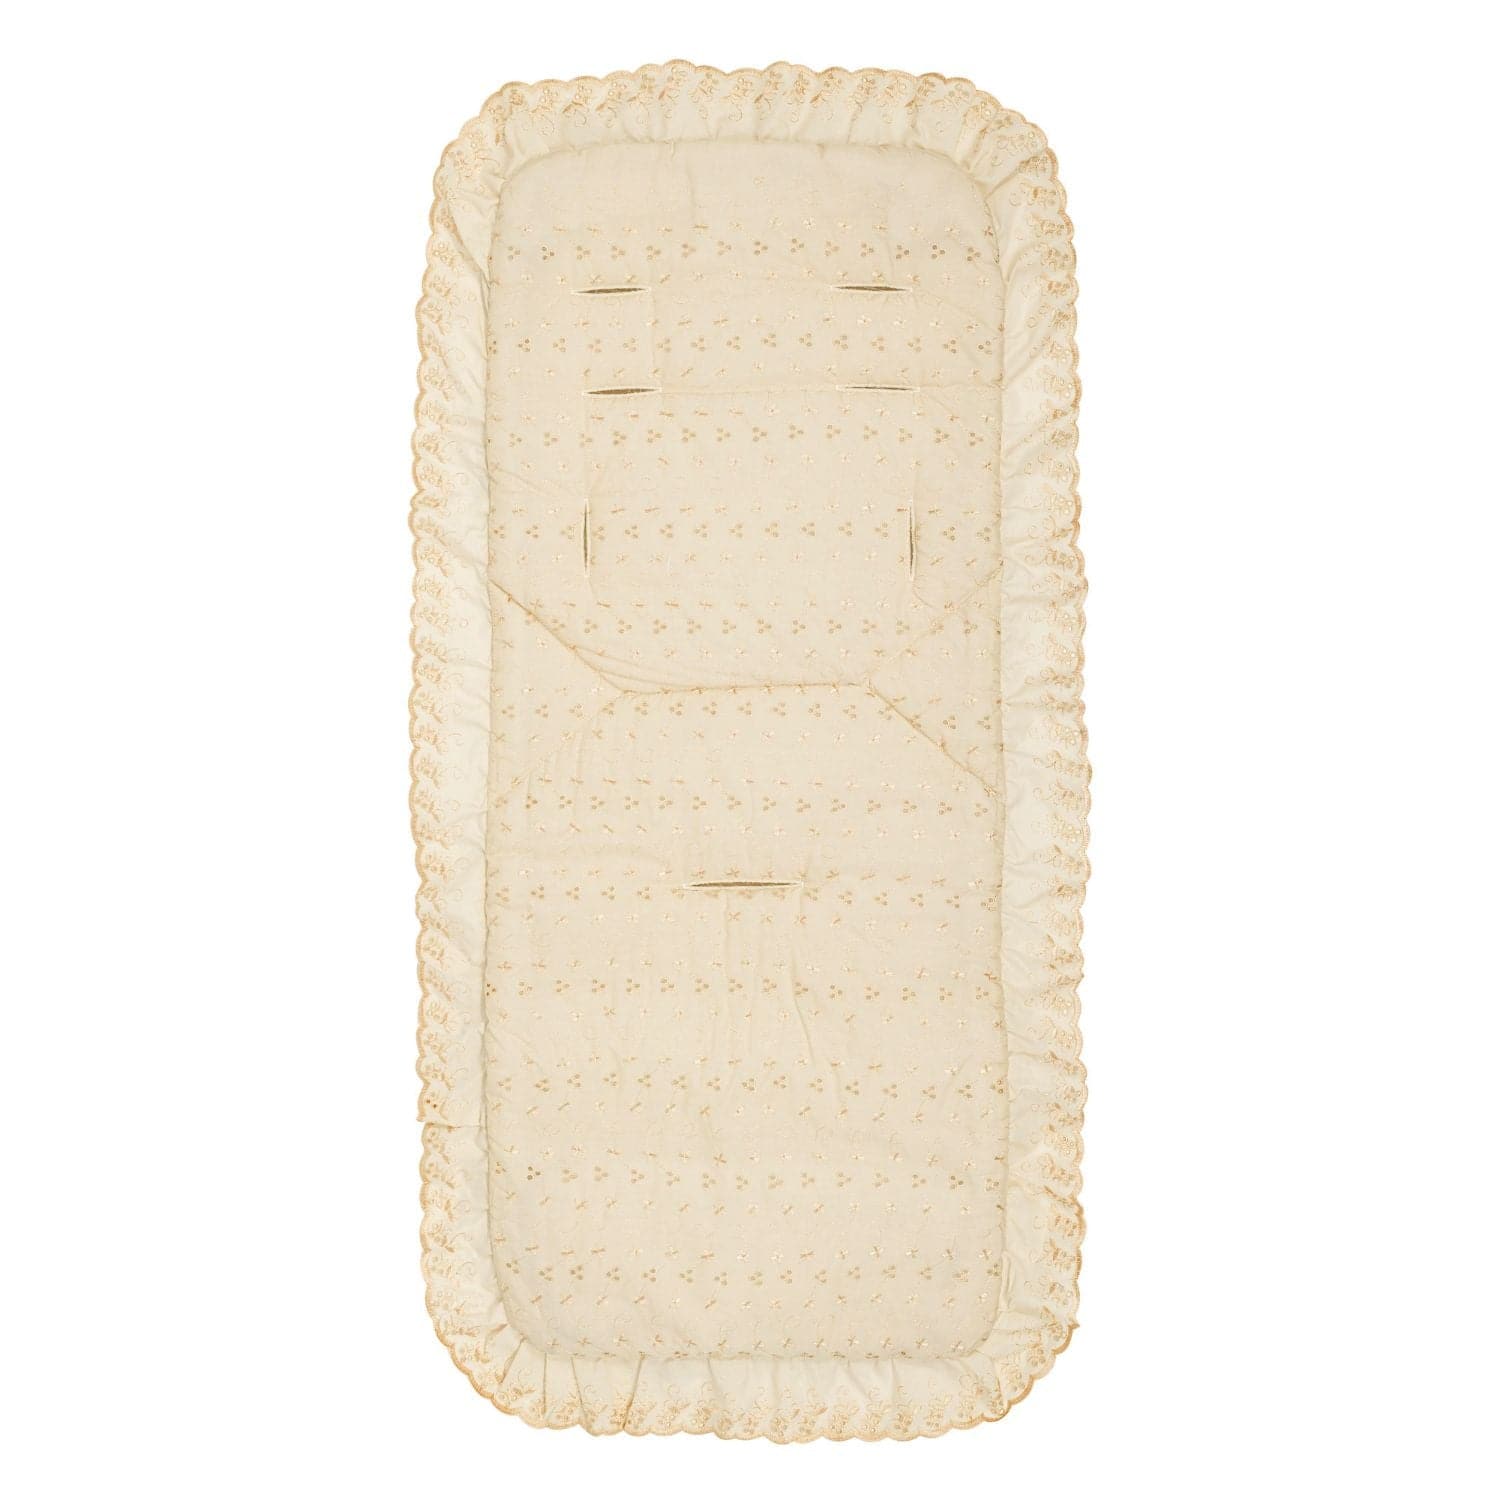 Broderie Anglaise Pushchair Seat Liner Compatible with Babylo - Fits All Models - For Your Little One